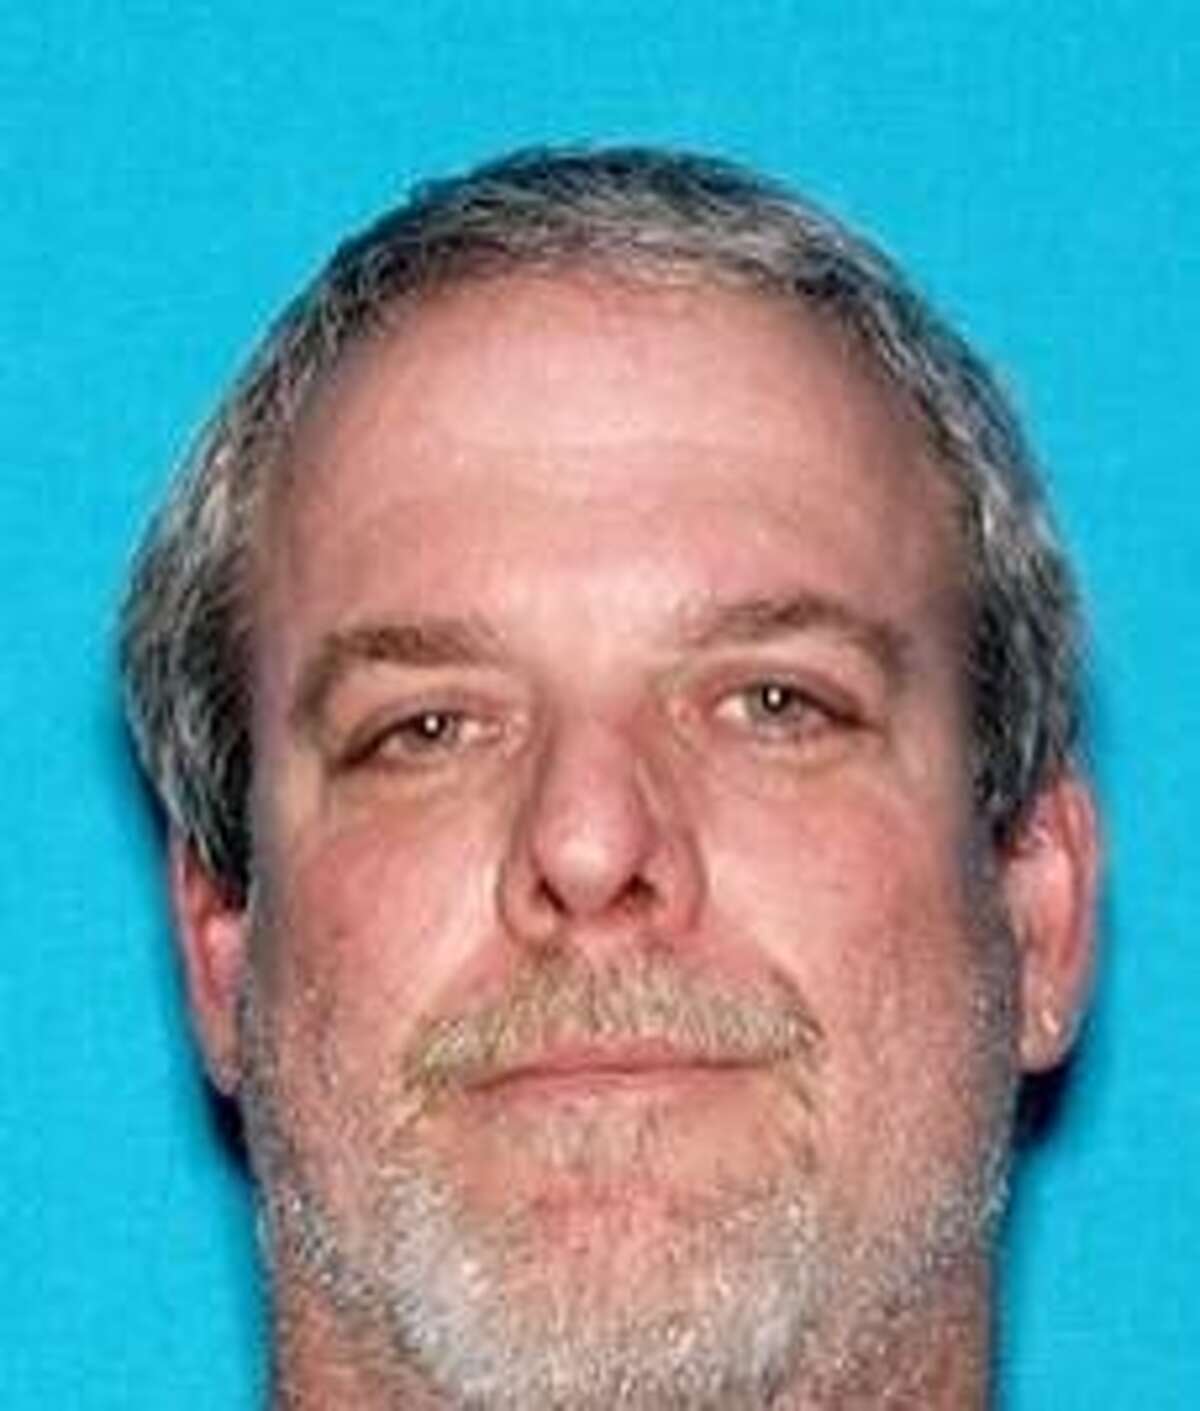 Robert Hathaway is seen in a 2012 photo. Fairfield police say Hathaway hanged himself Feb. 15, 2014, after being interviewed in connection with the death of Priscilla Strole.